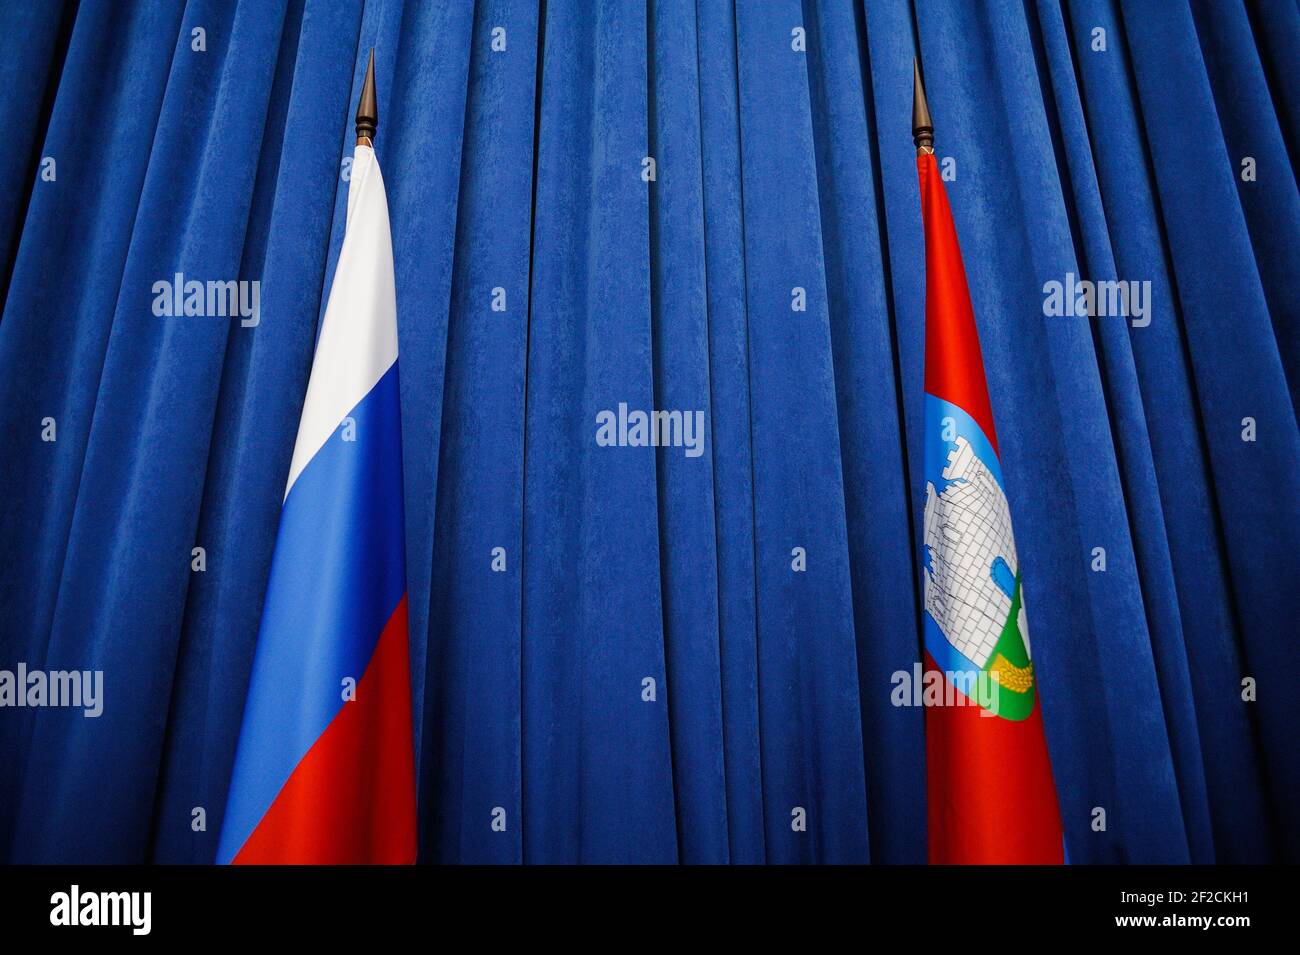 Flags of Russian Federation and orel Region on blue background horizontal Stock Photo